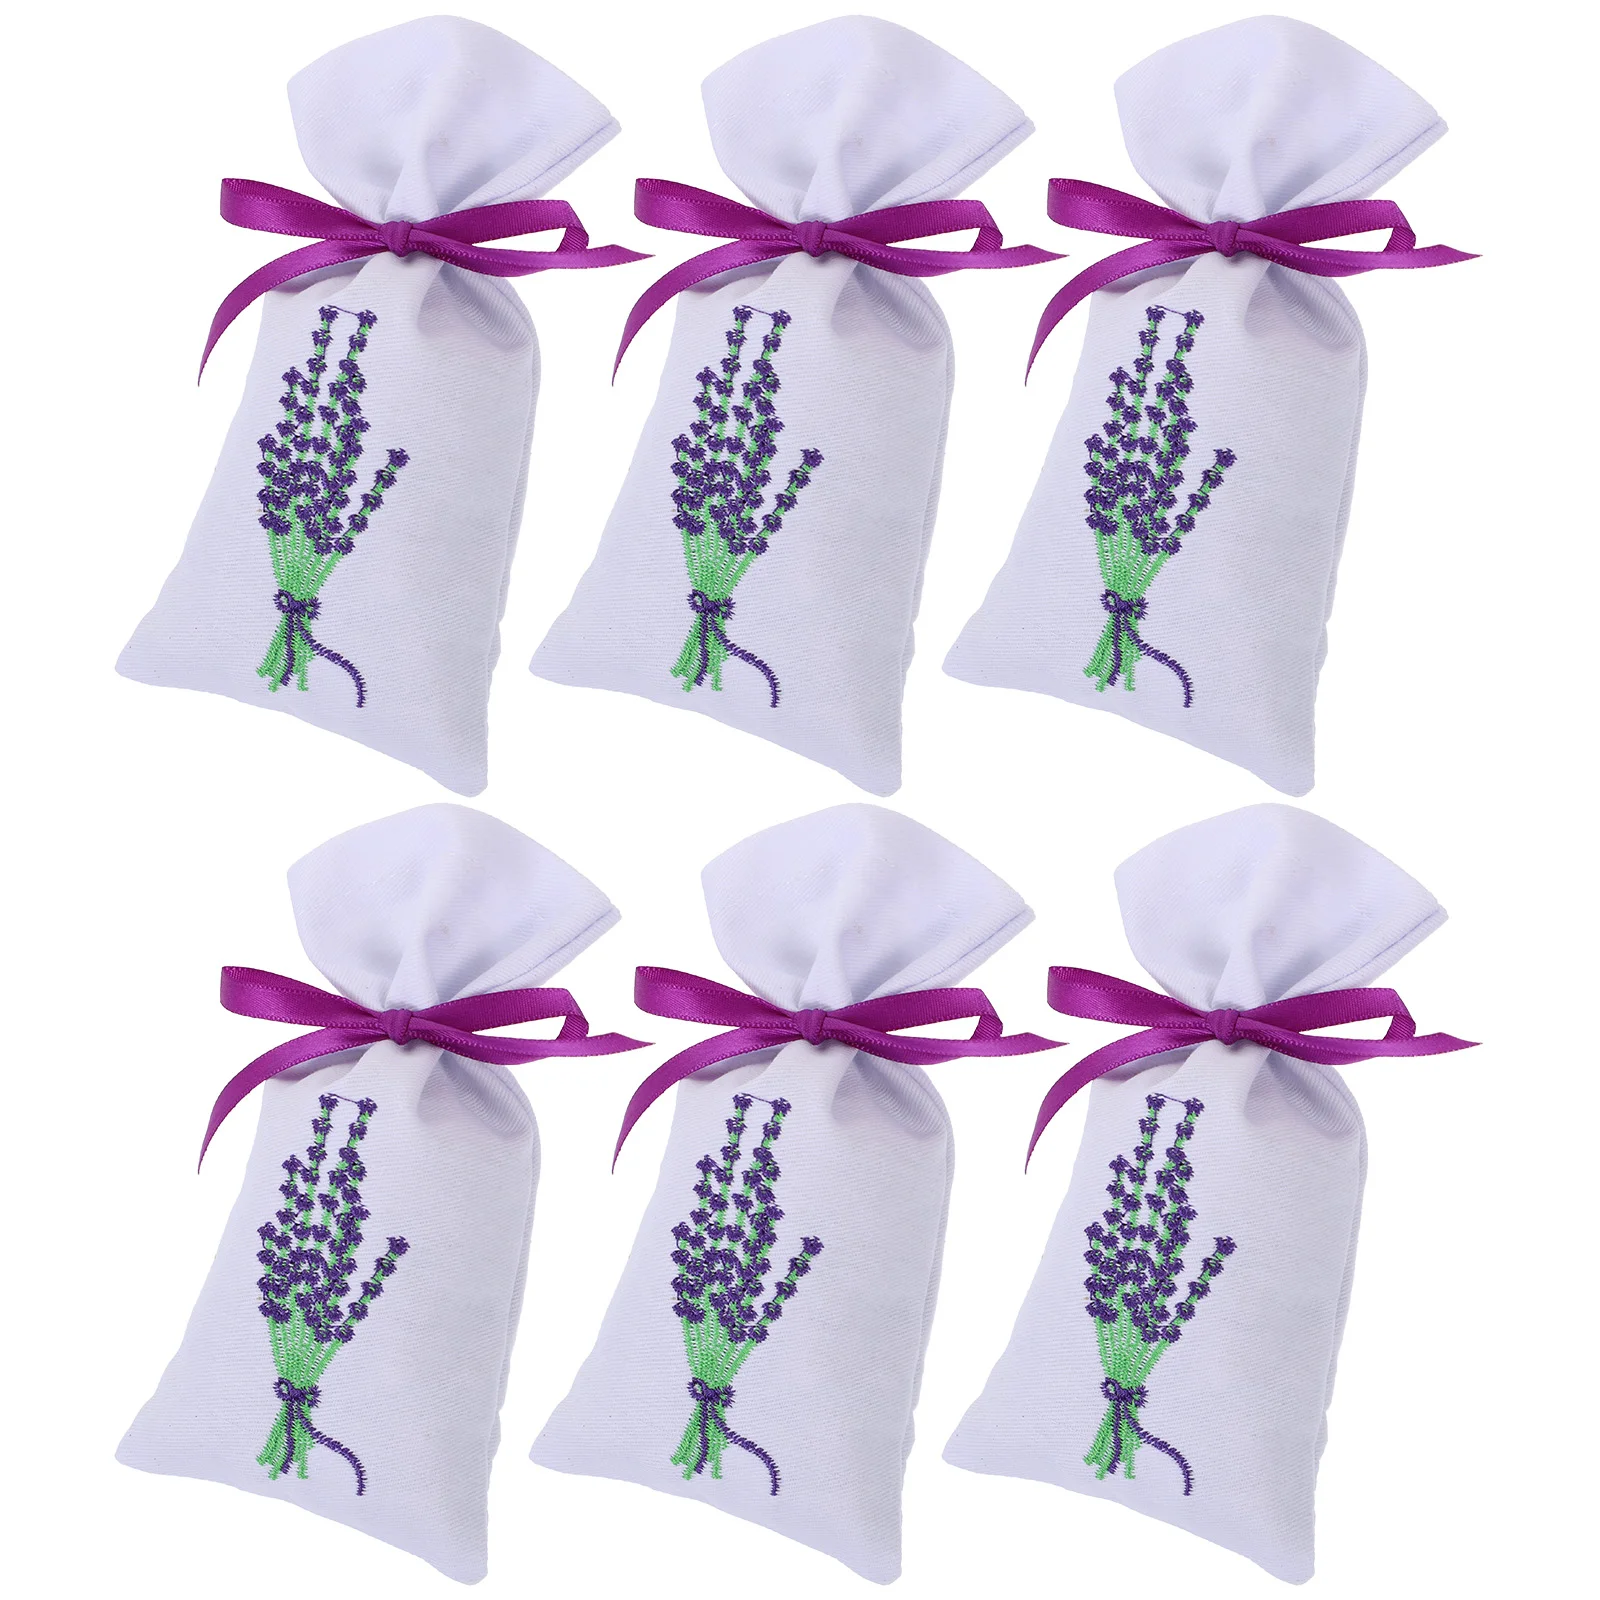 

Lavender Sachet Sachets Empty Drawstring Candy Pouch Gift Flower Dried Jewelry Scented Perfume Pouches Satchel Fragrance Favor